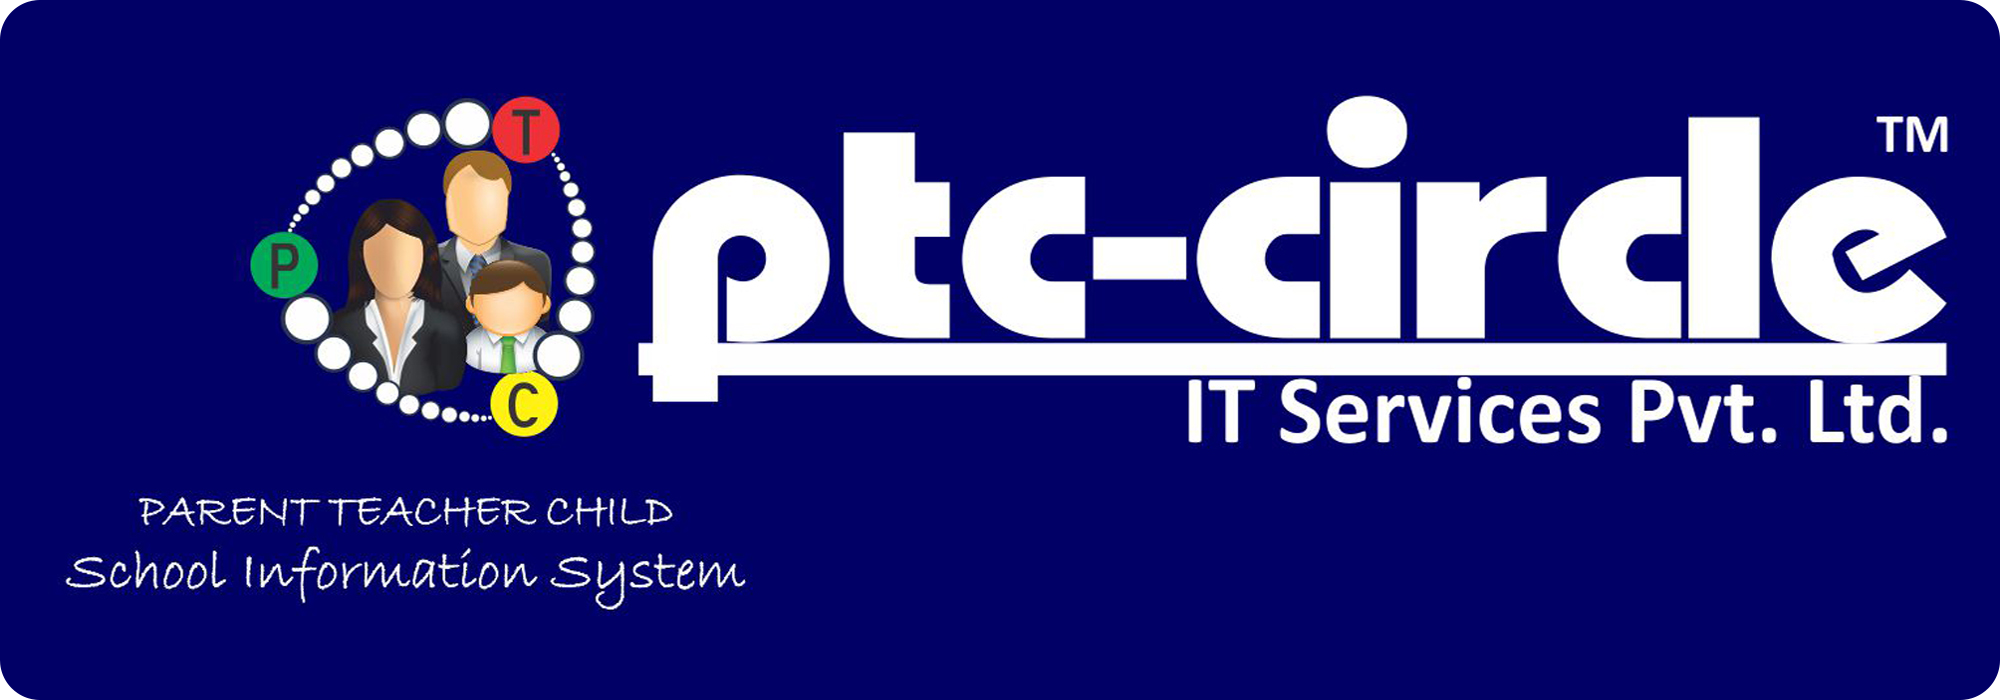 PTC Circle Pvt. Ltd.- A Complete Educational Services Provider Company